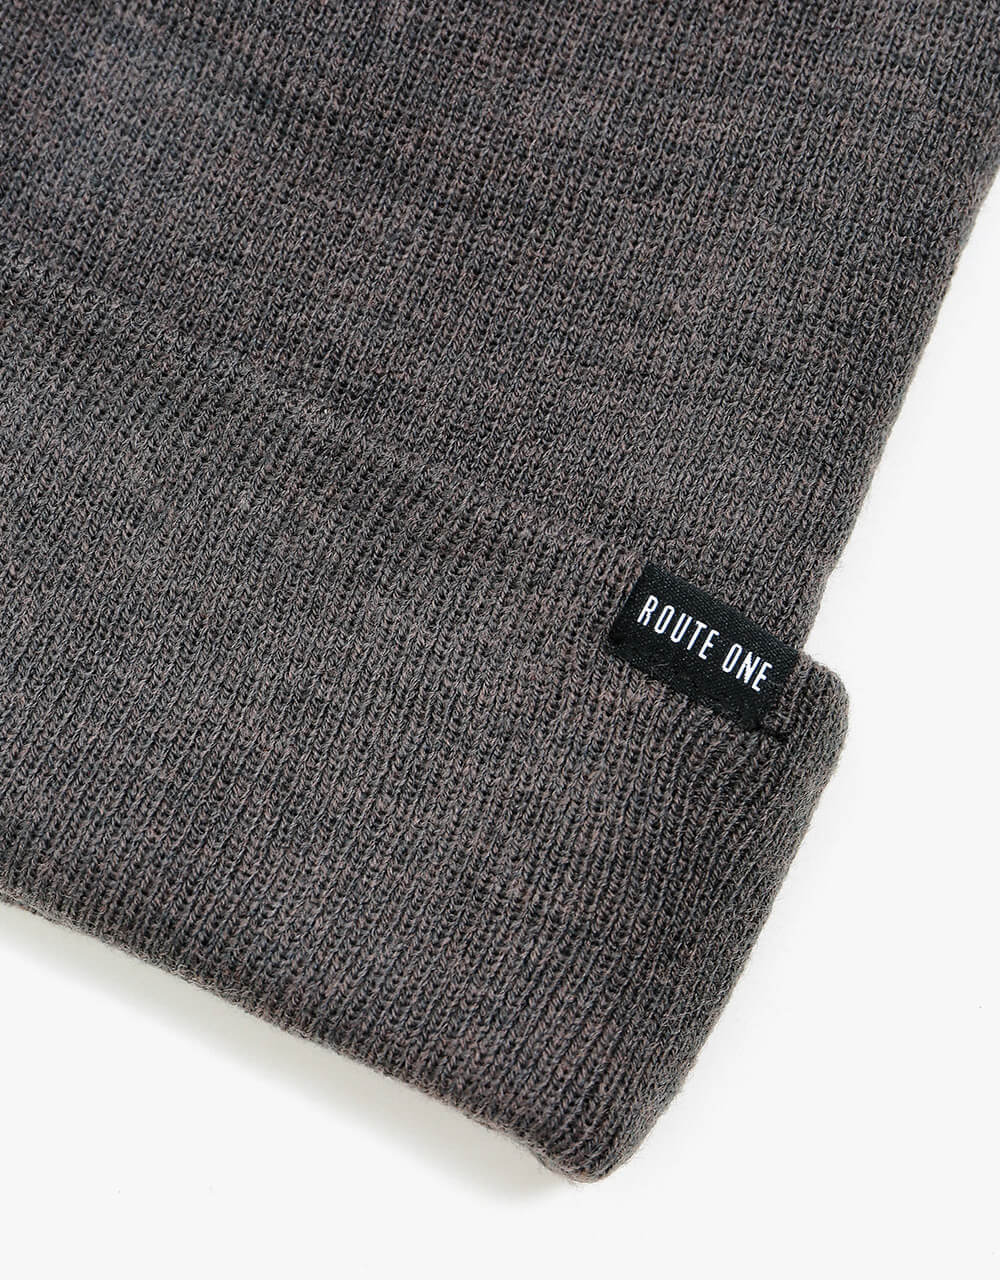 Route One Recycled NY Cuff Beanie - Slate Grey